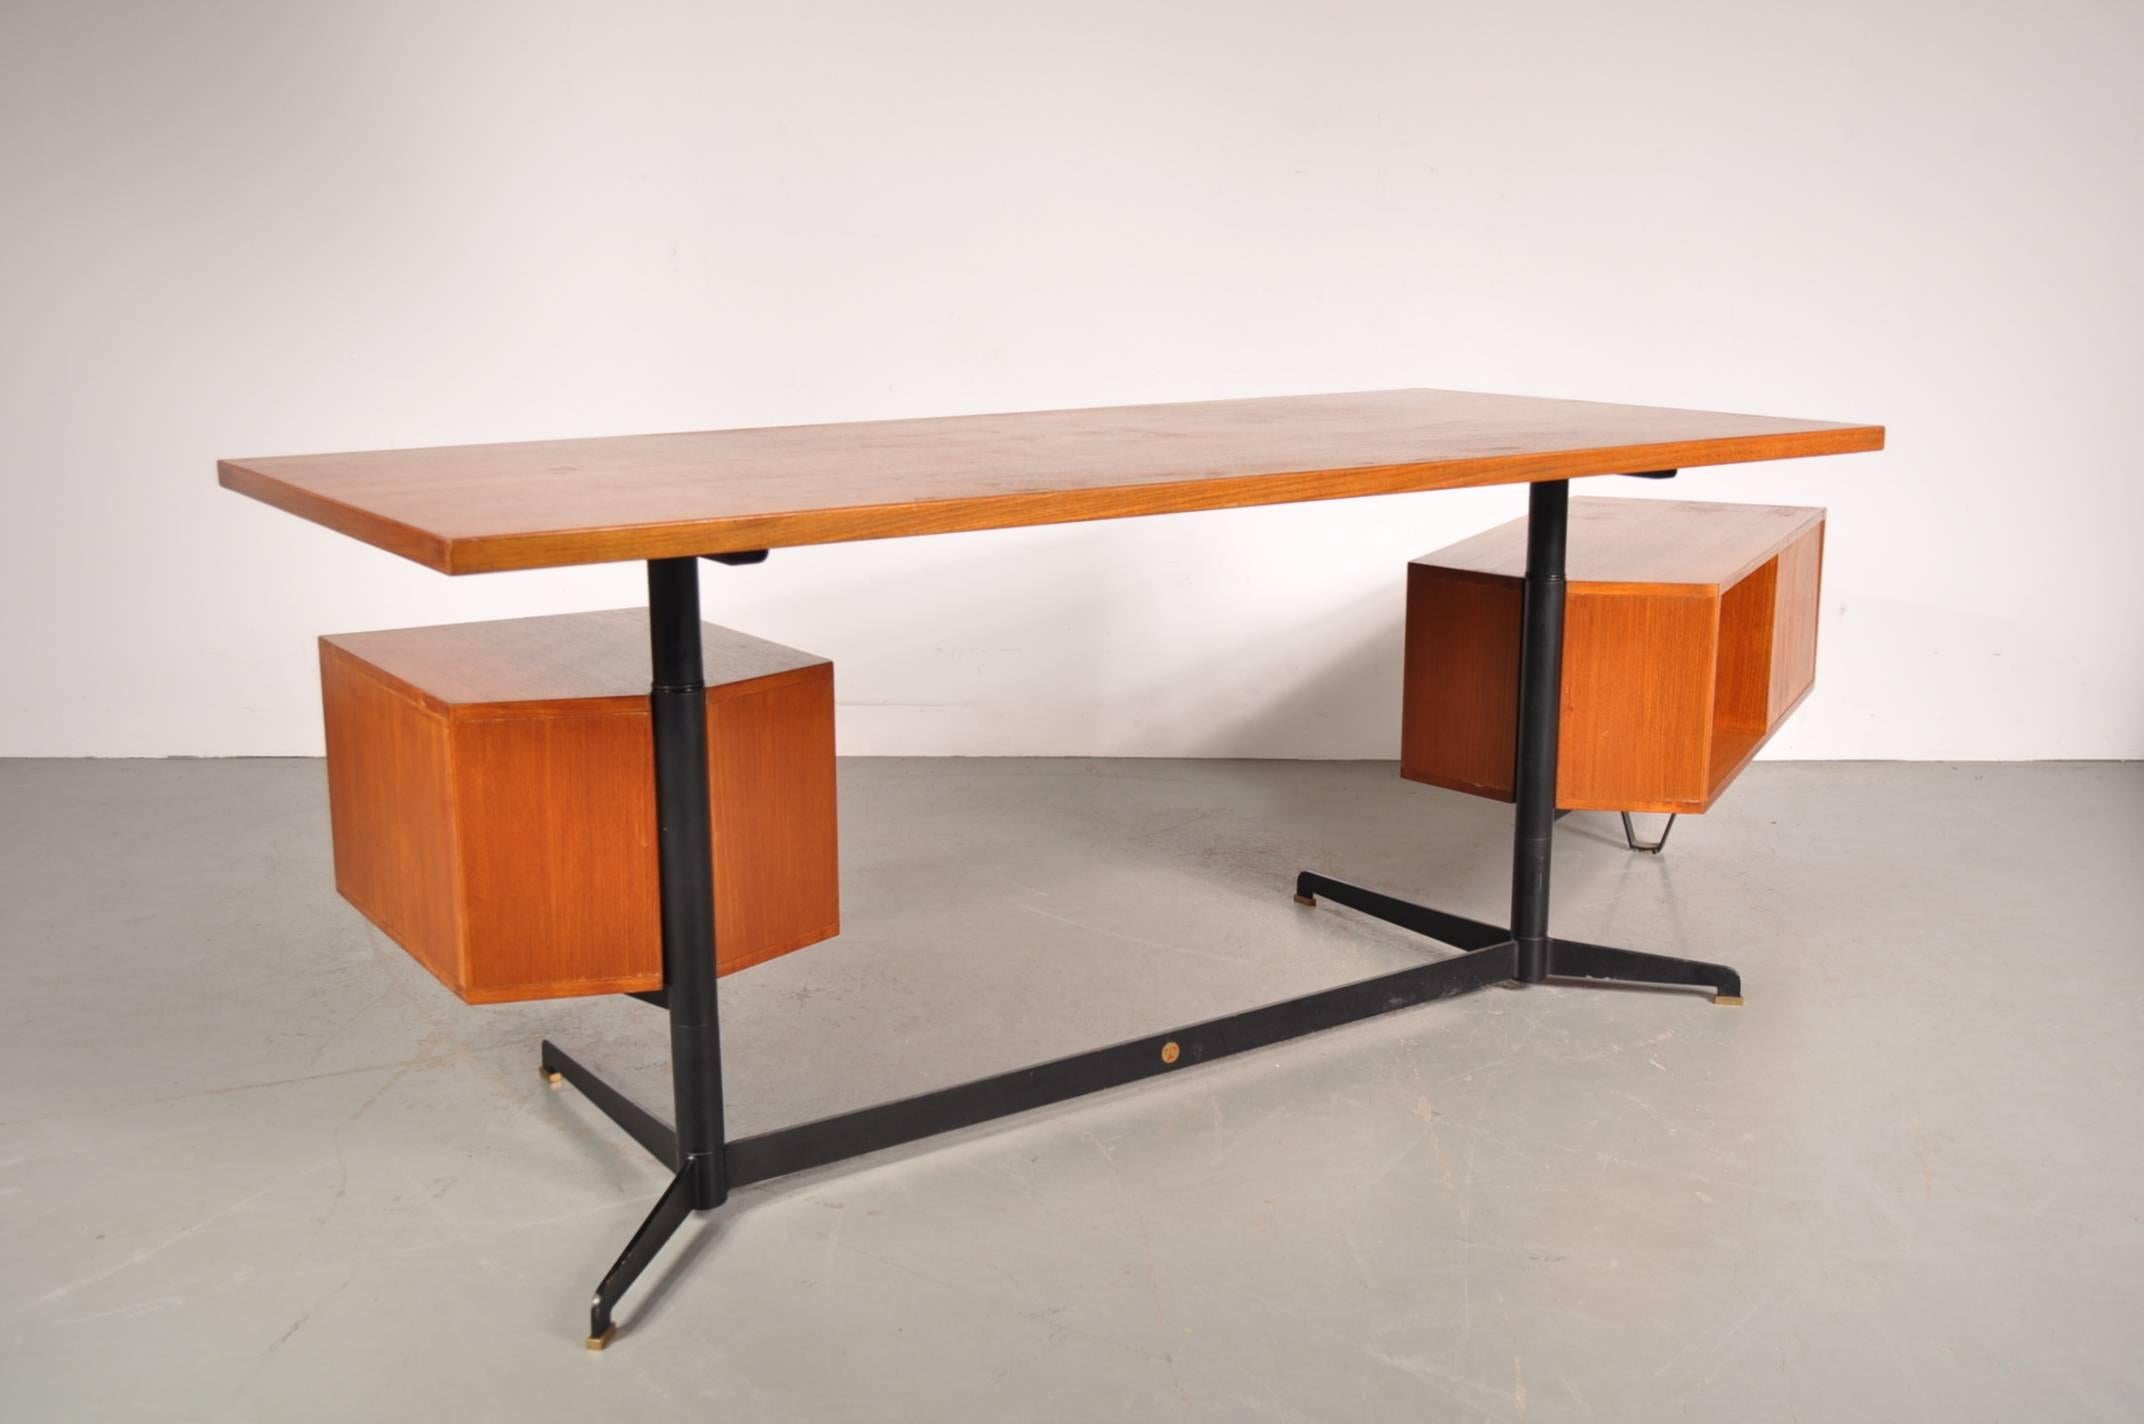 Amazing swivable desk model T95 designed by Osvaldo Borsani, manufactured by Tecno in Milan, Italy in 1952.

This eye-catching desk has a unique design with the integrated drawer being adjustable in position, making it a versatile piece that would